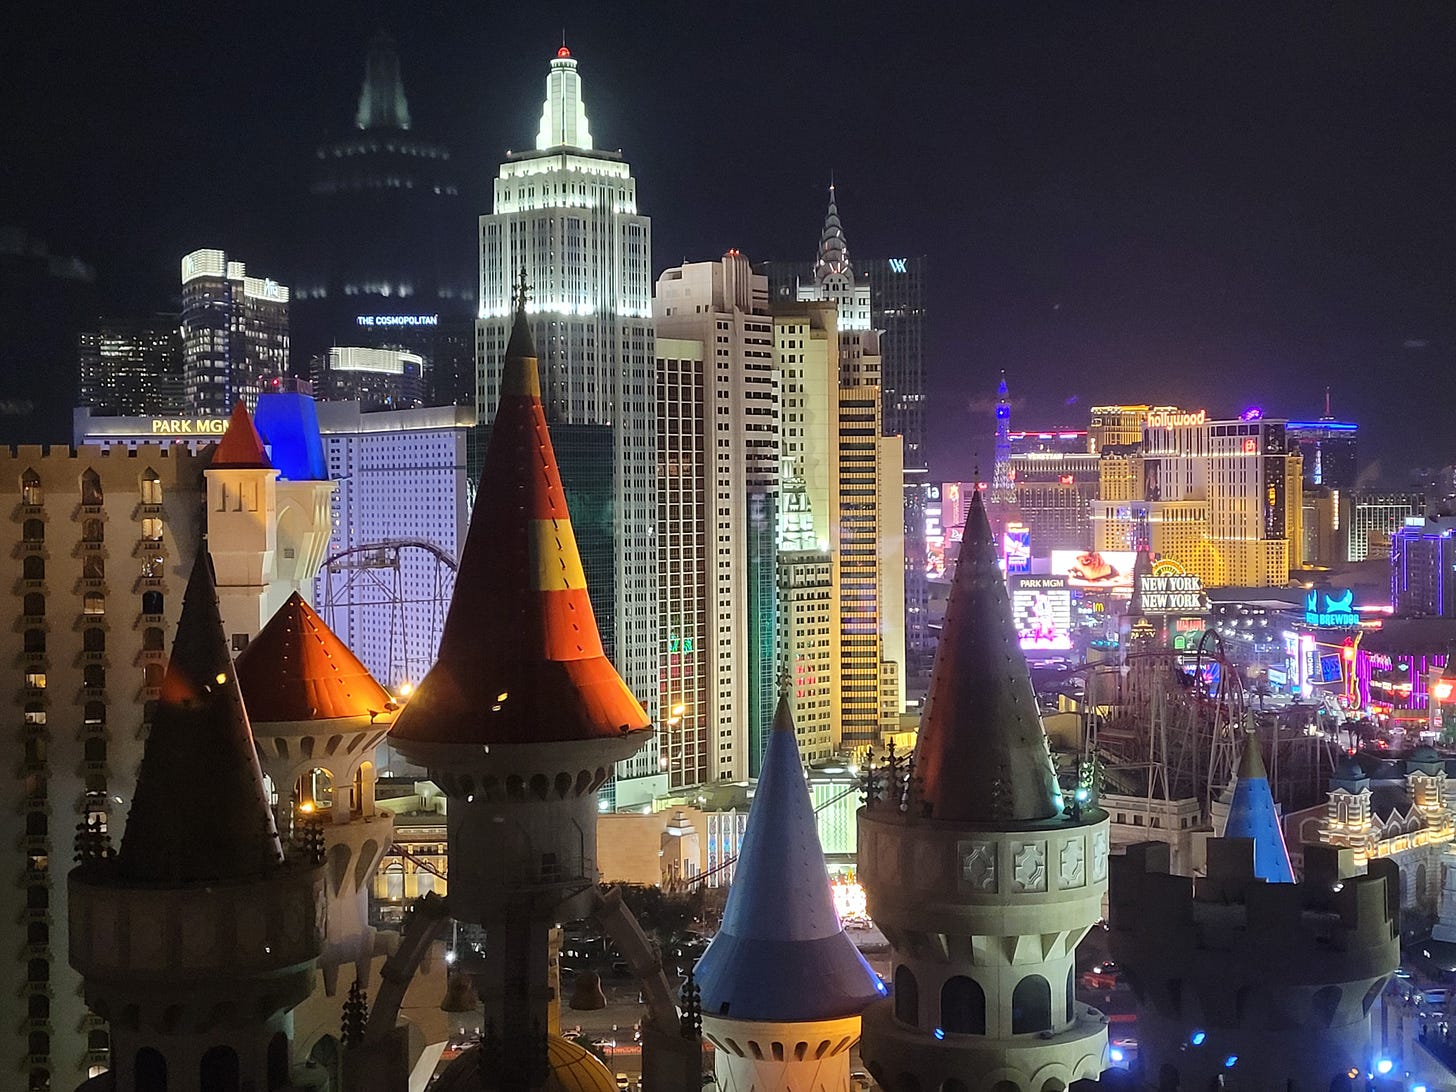 A view from a Vegas hotel room, with fairytale castle turrets in the foreground, New York in the background and the lights of the Strip in the distance